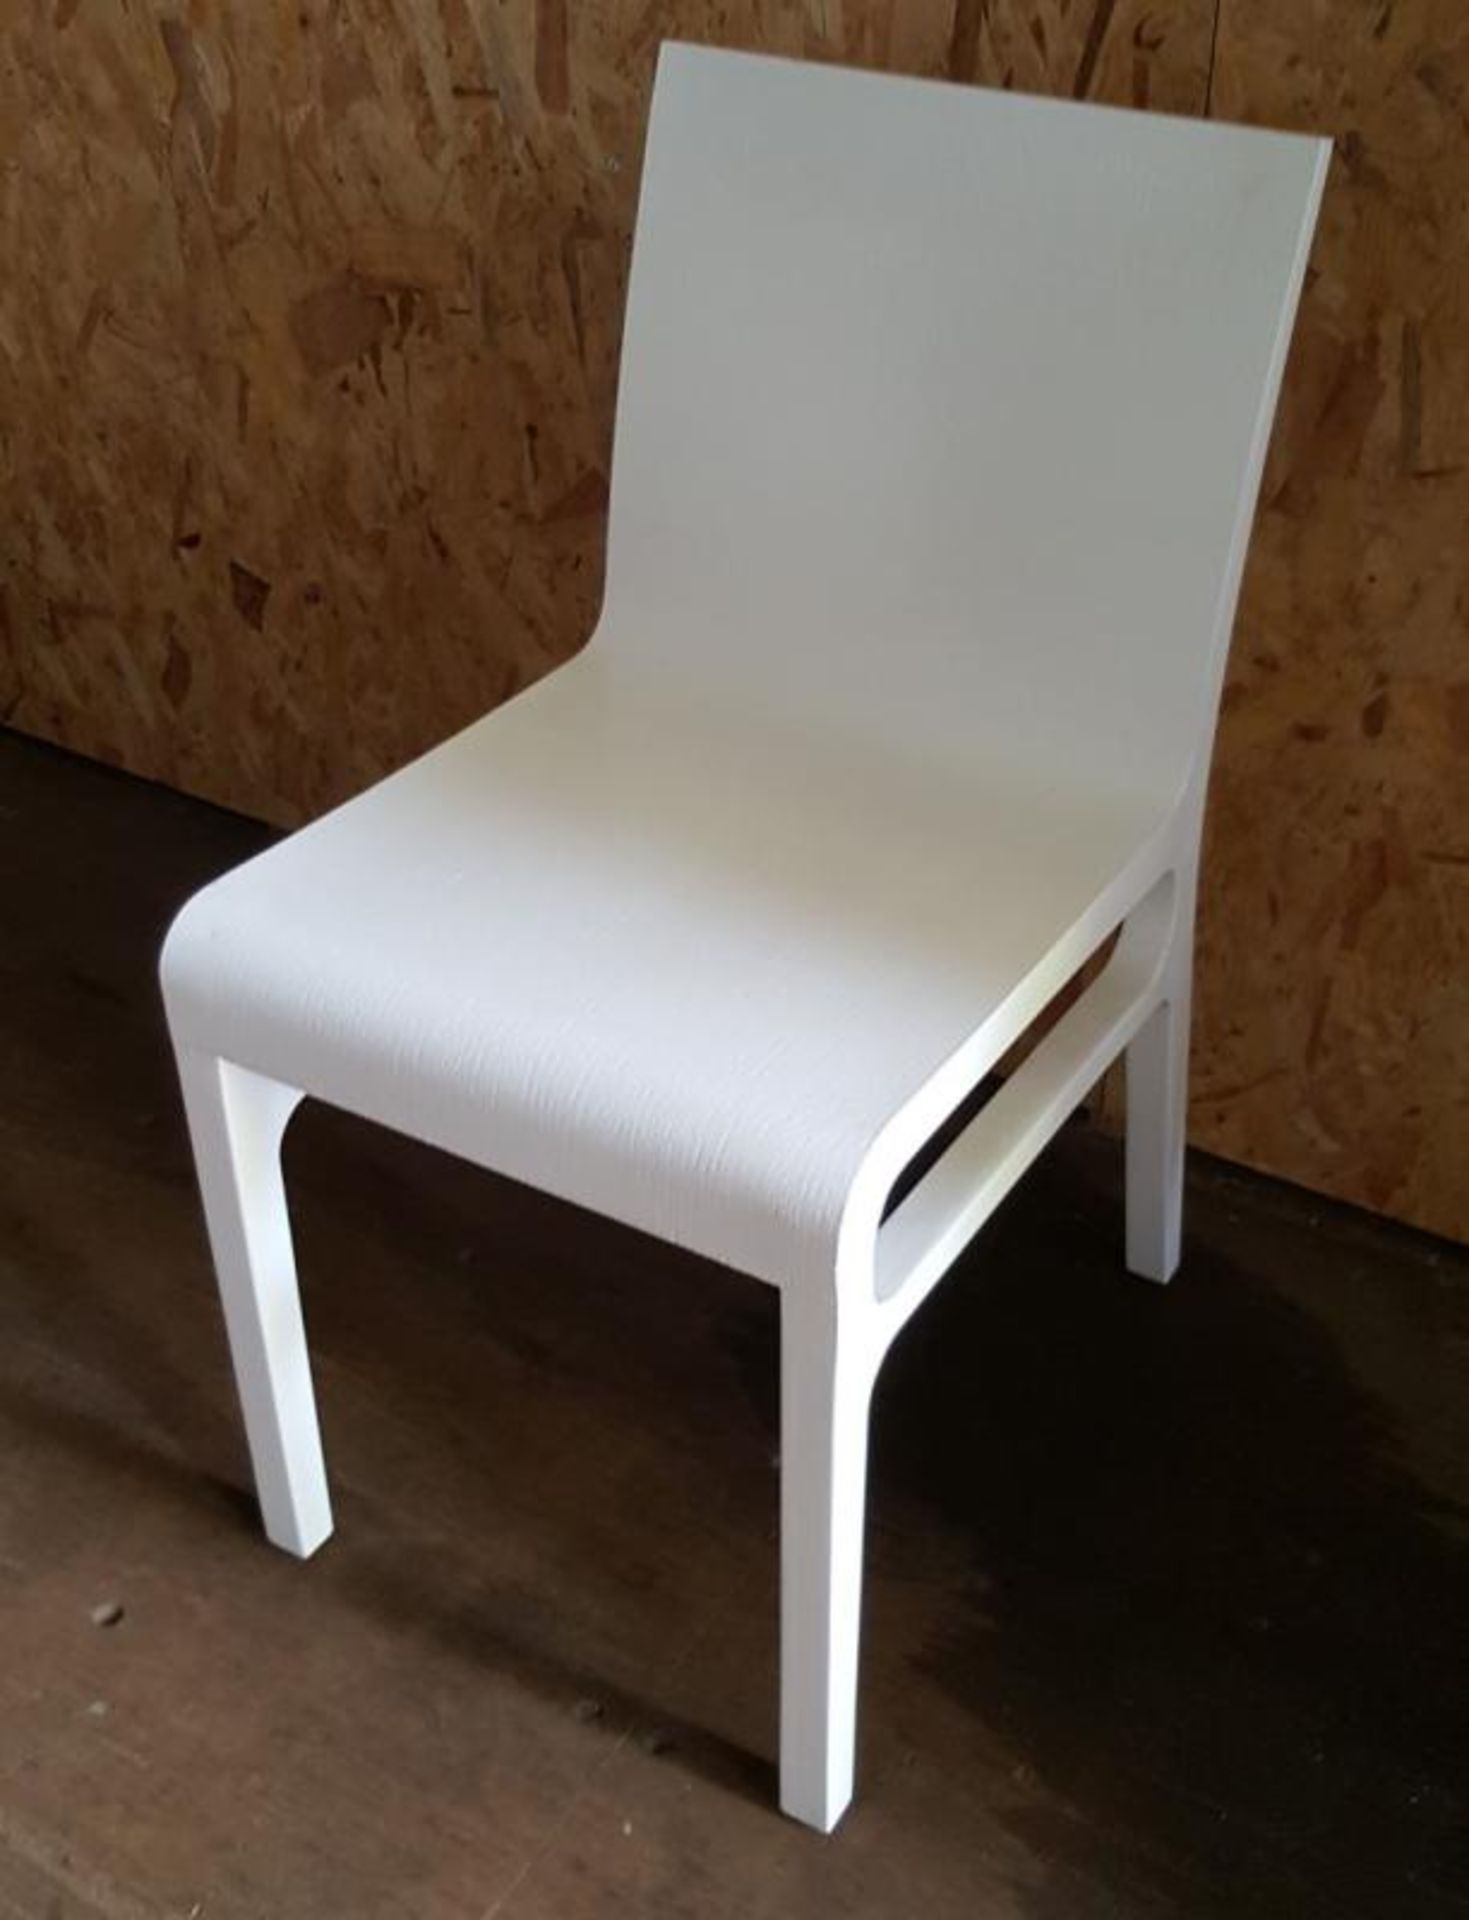 4 x Wooden Dining Chairs Set With A Bright White Finish - Dimensions: Used, In Good Condition - Ref